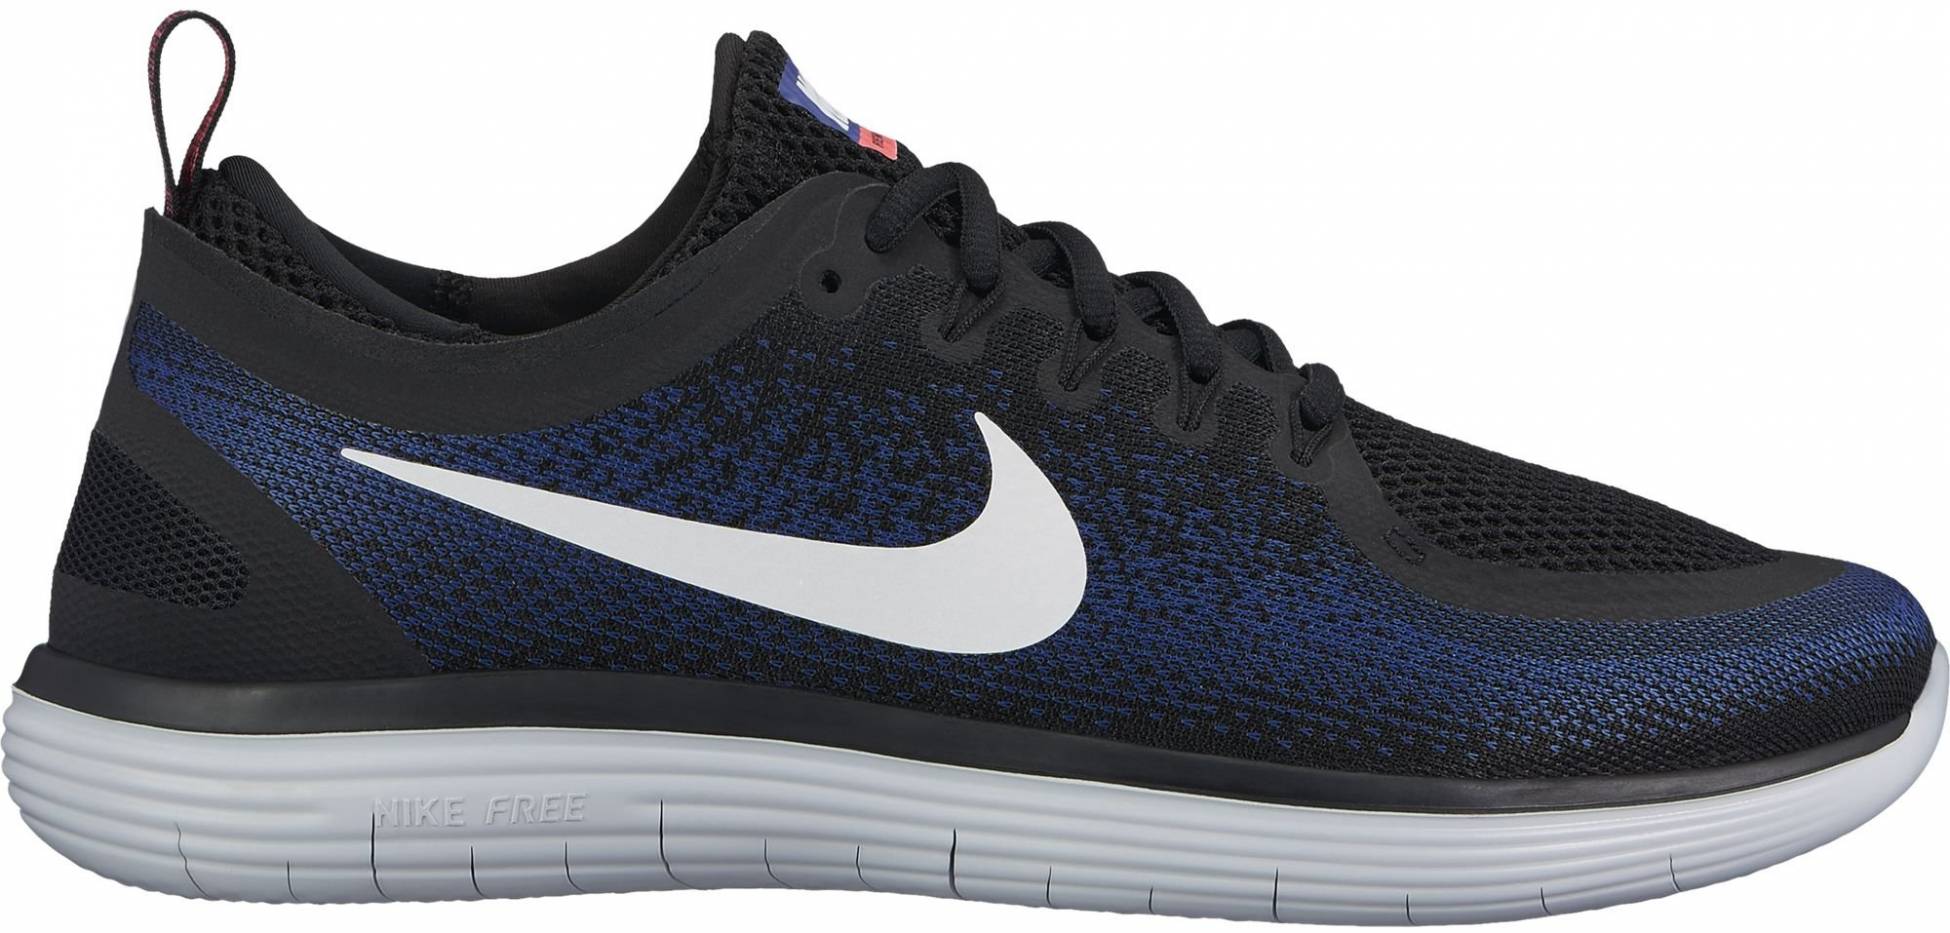 Only £101 + Review of Nike Free RN Distance 2 | RunRepeat